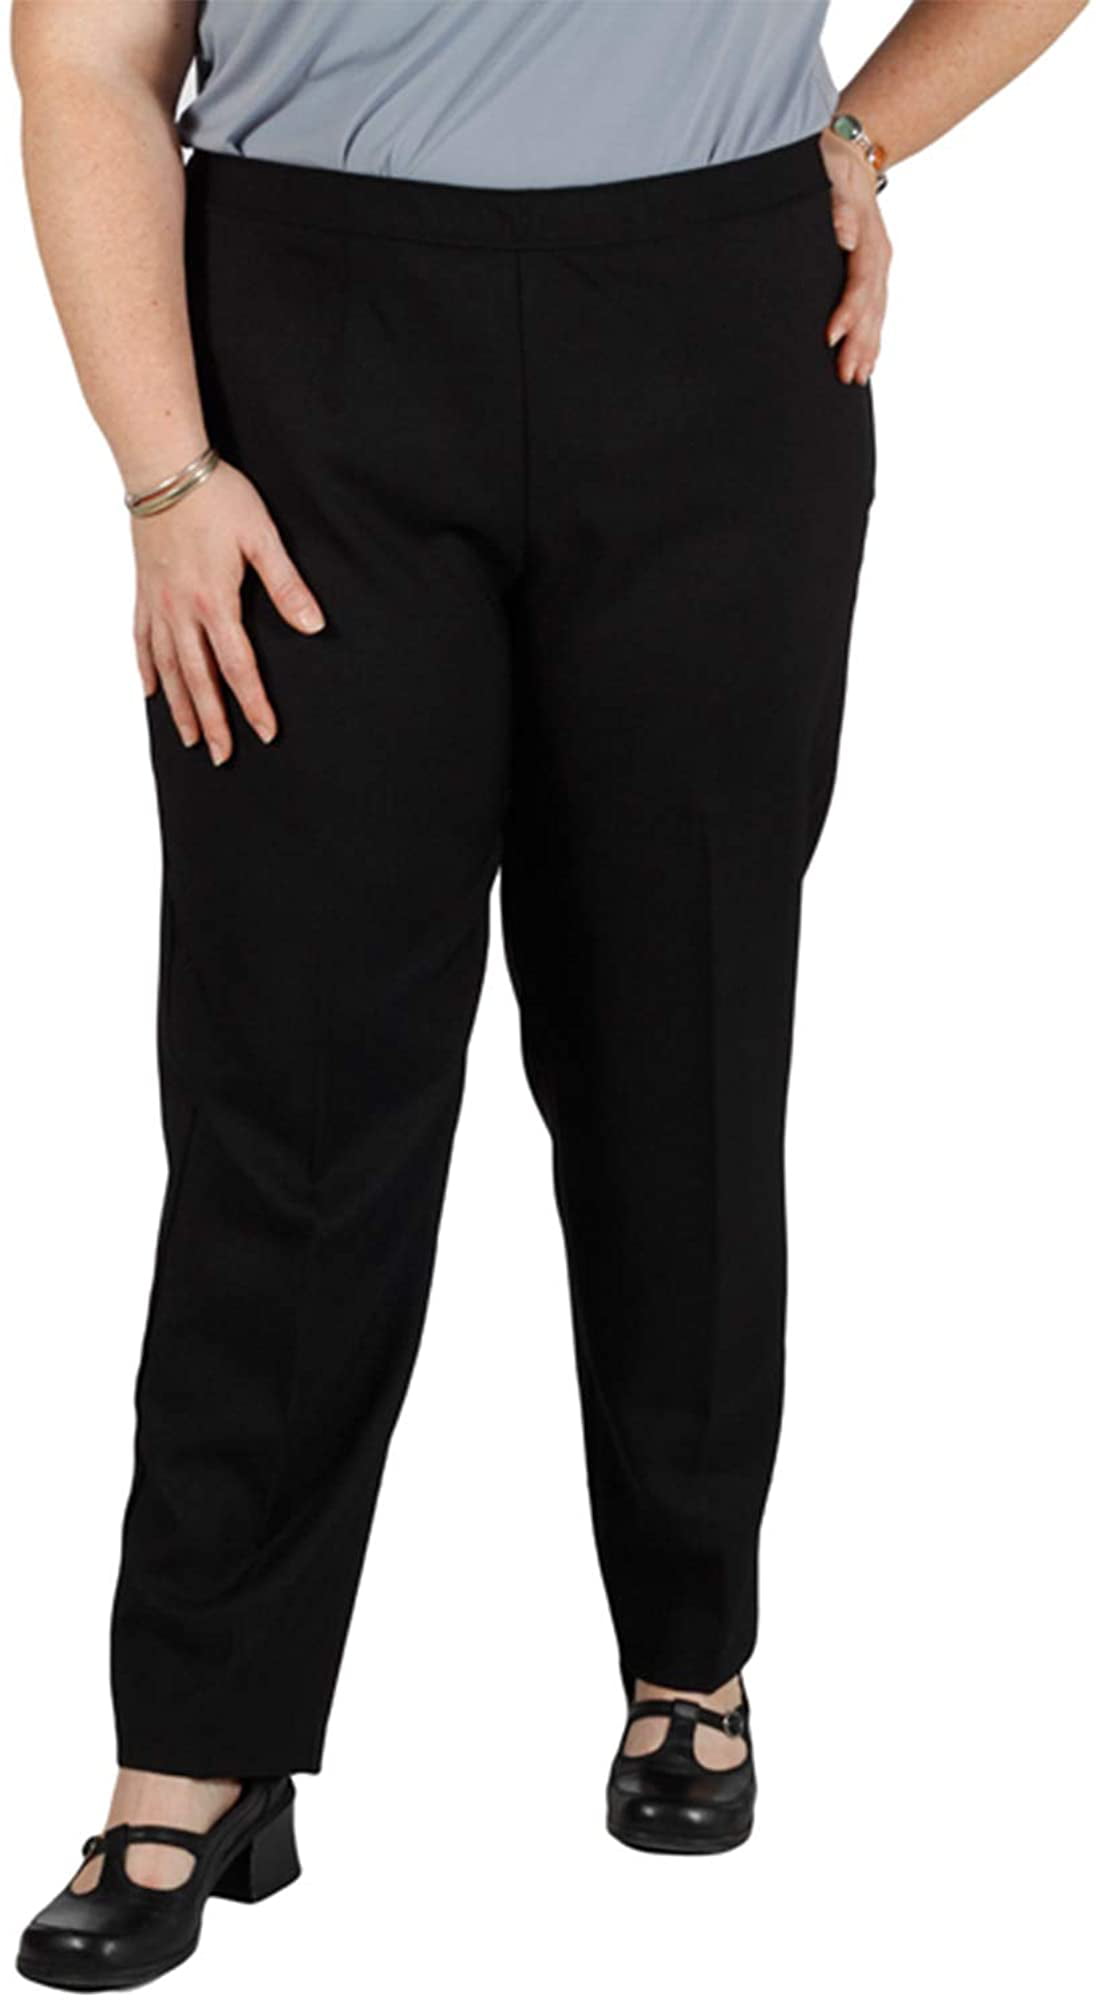 Bend Over Womens Plus Size Elastic Waist Pull-On Pants | Walmart Canada